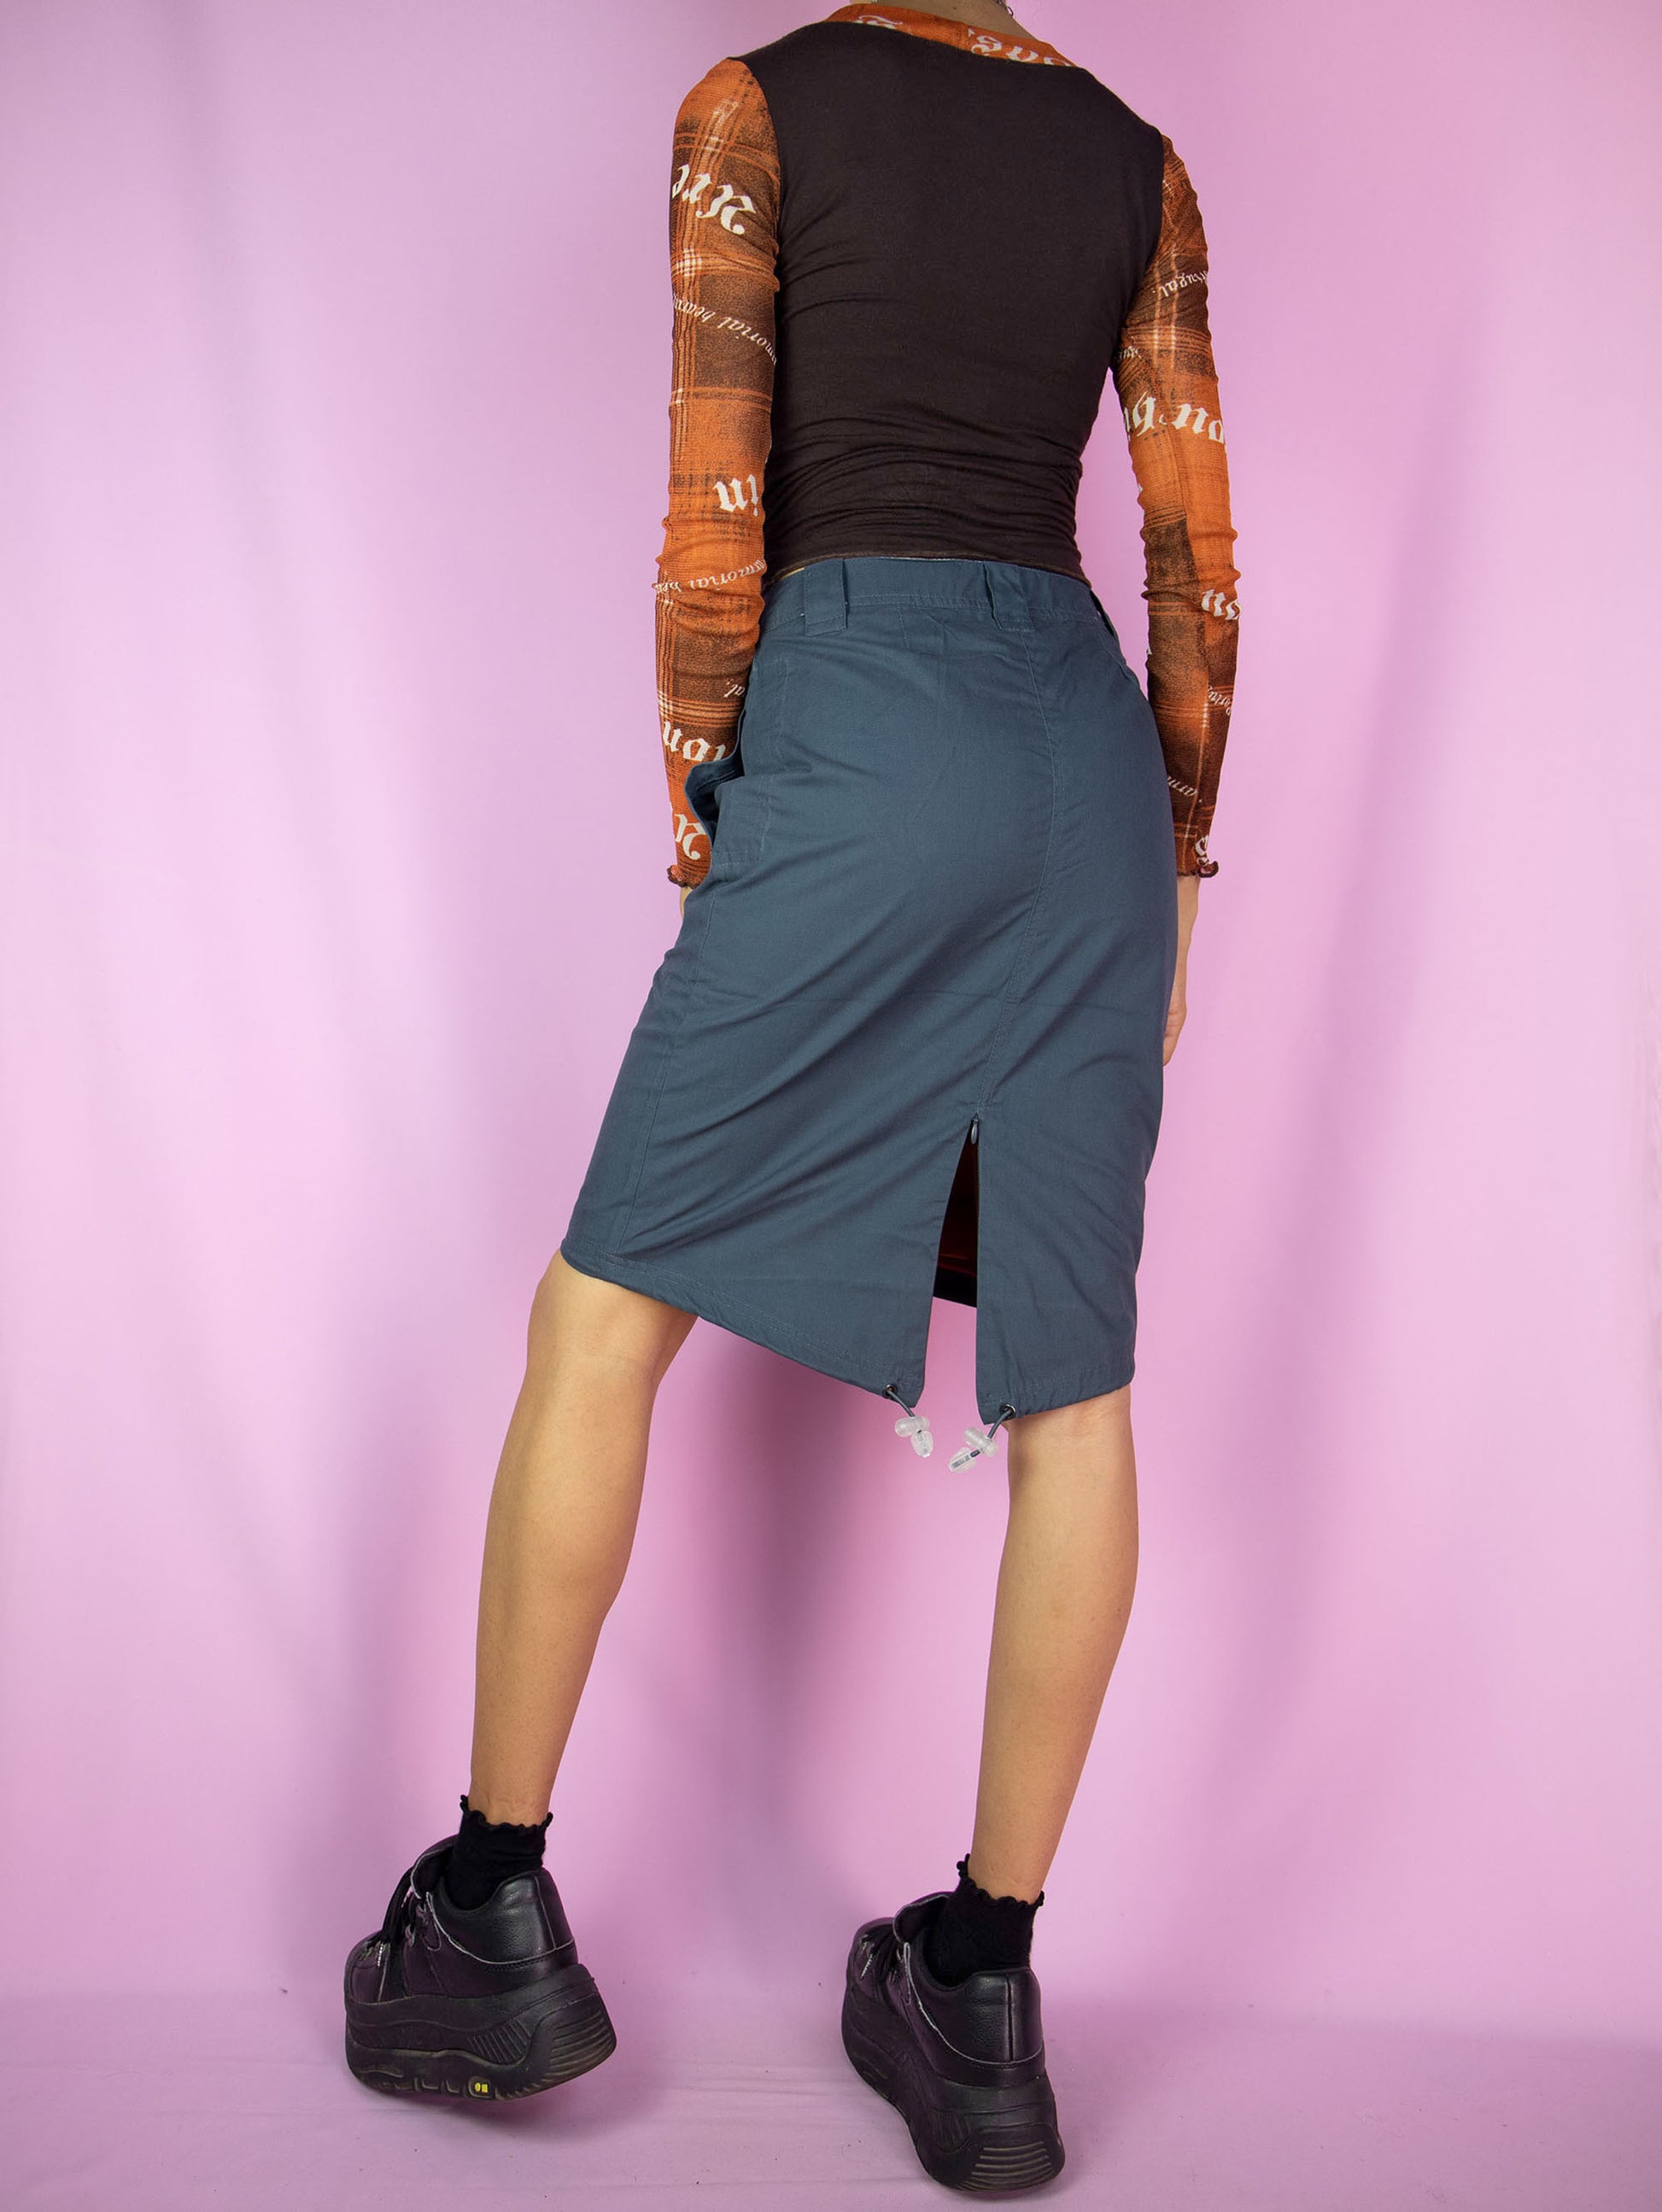 The Y2K Blue Grunge Utility Skirt is a vintage asymmetric dark blue-gray skirt with pockets, a back slit and front zipper closure. Cyber gorpcore 2000s cargo mini skirt.